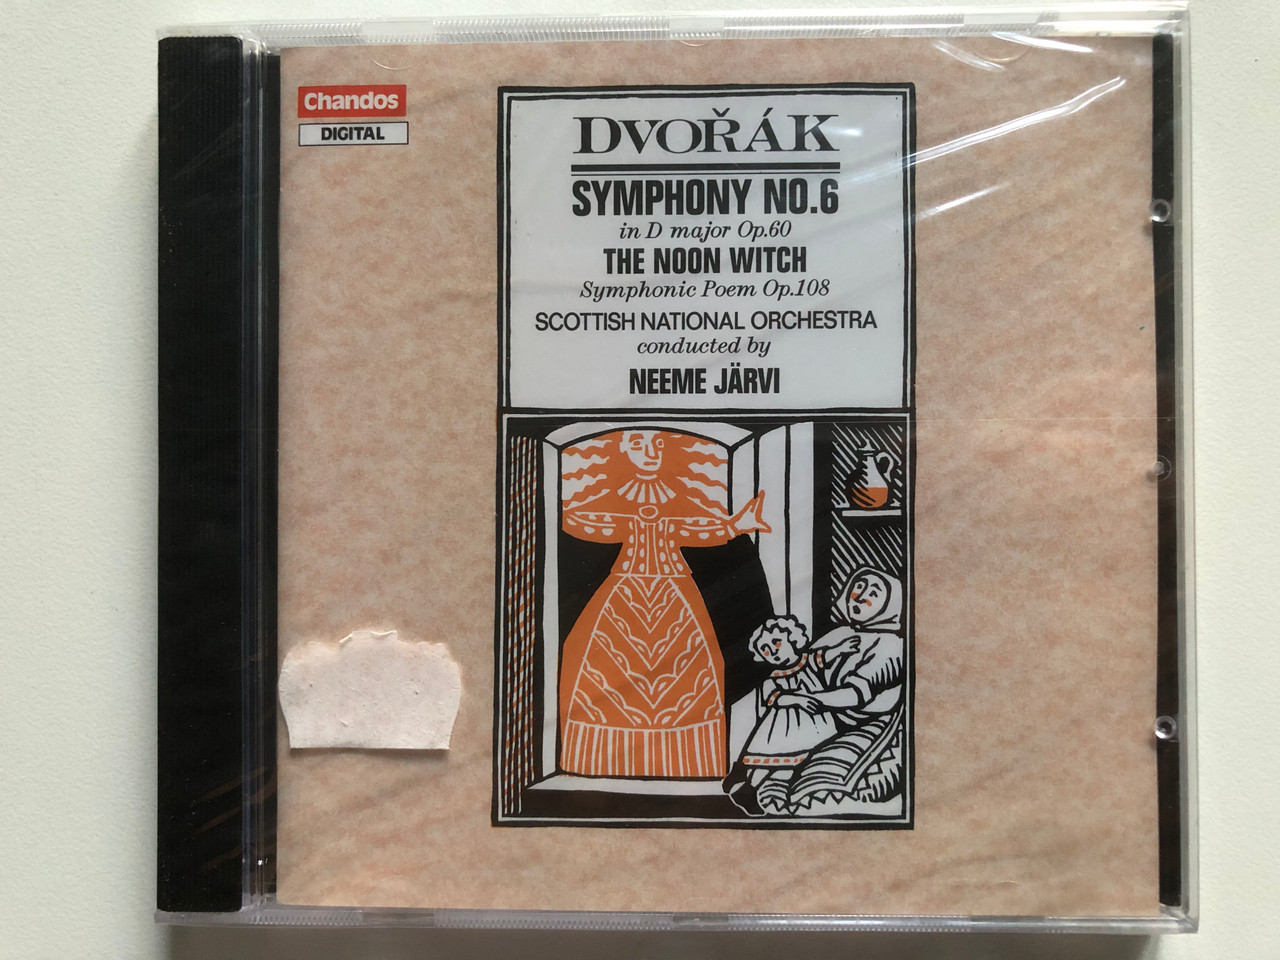 https://cdn11.bigcommerce.com/s-62bdpkt7pb/products/0/images/324934/Dvorak_Symphony_No._6_in_D_major_Op._60_The_Noon_Witch-Symphonic_Poem_Op._108_-_Scottish_National_Orchestra_conducted_by_Neeme_Jarvi_Chandos_Audio_CD_1987_CHAN_8530_1__49634.1708413283.1280.1280.JPG?c=2